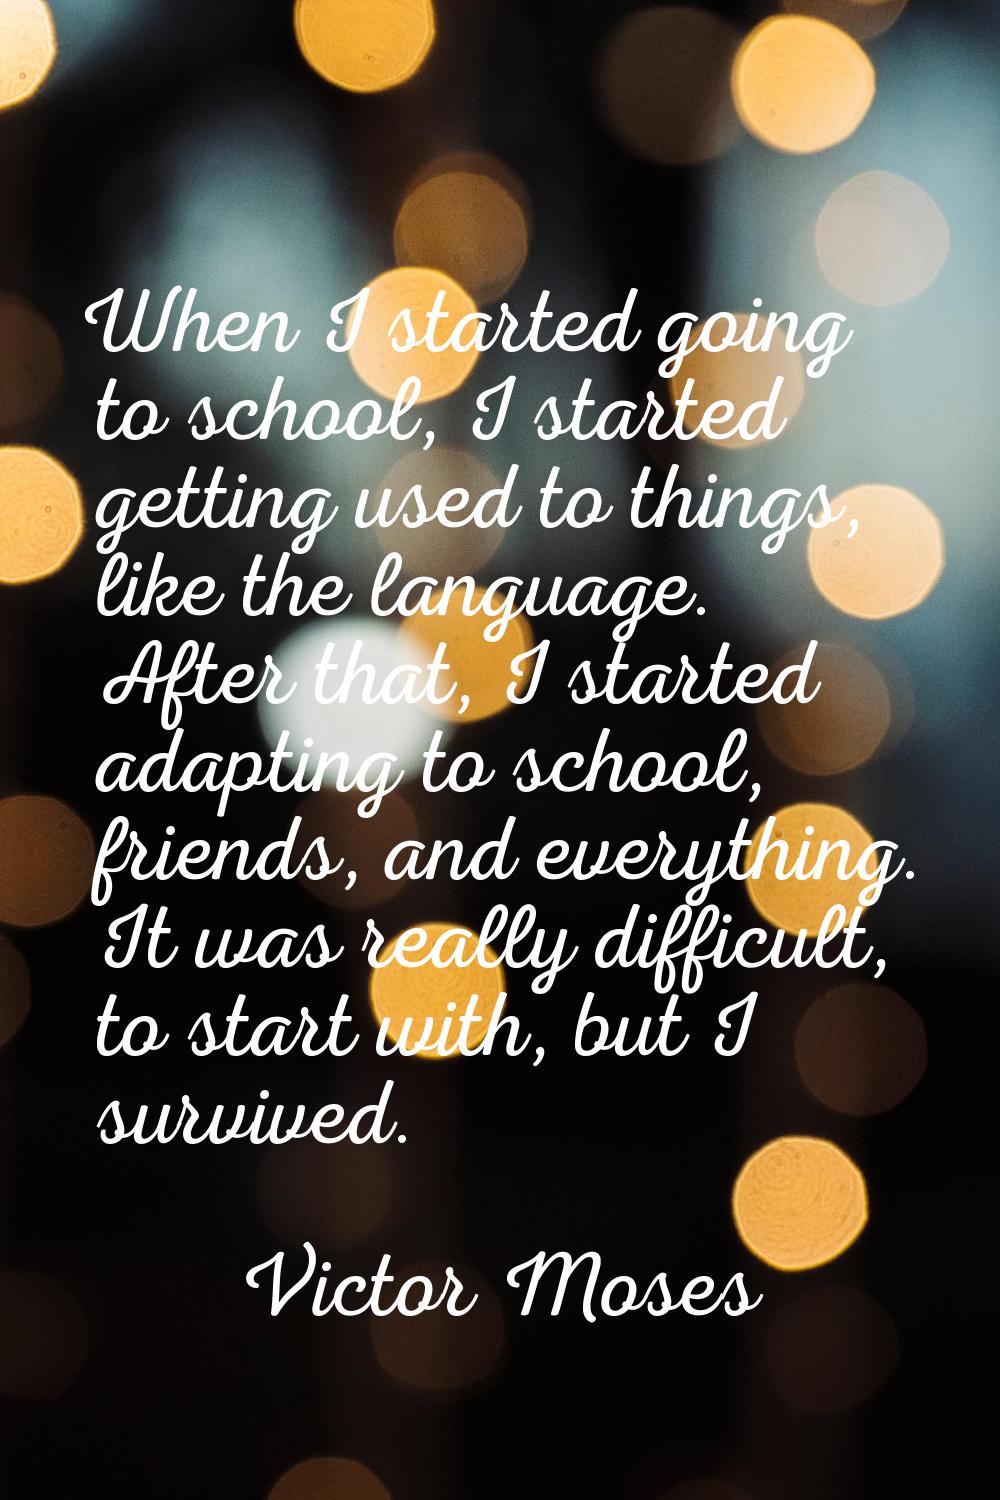 When I started going to school, I started getting used to things, like the language. After that, I 